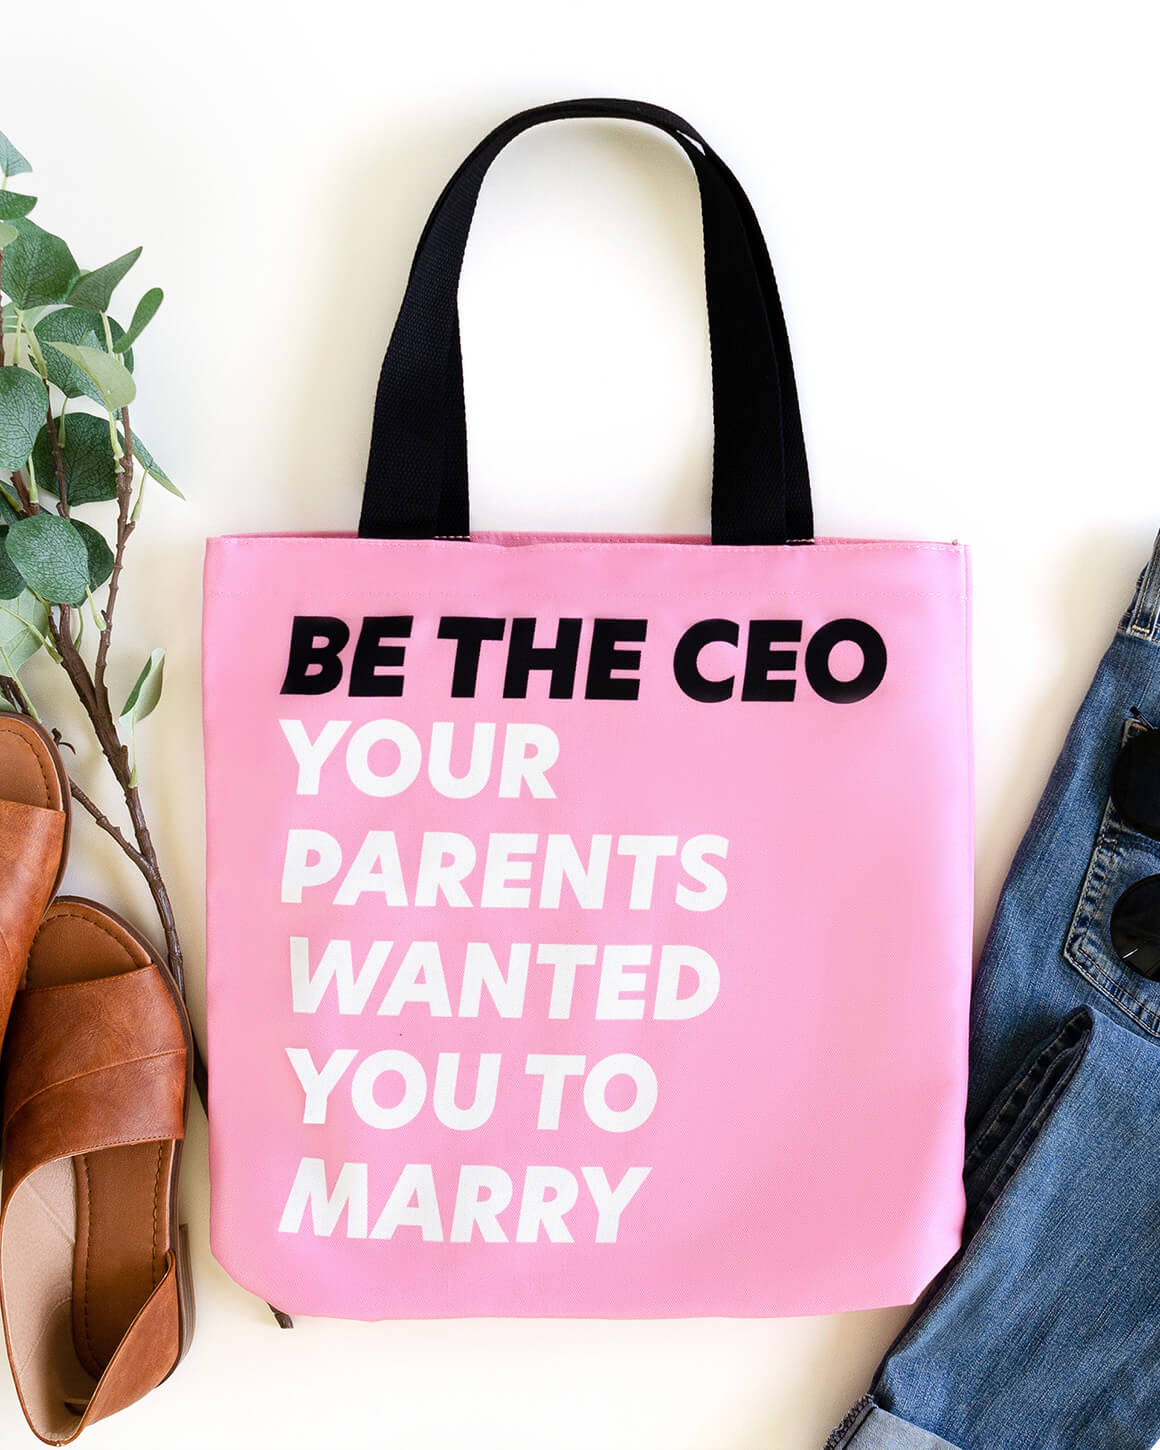 Be the CEO your parents wanted you to marry tote bag for feminist leaders